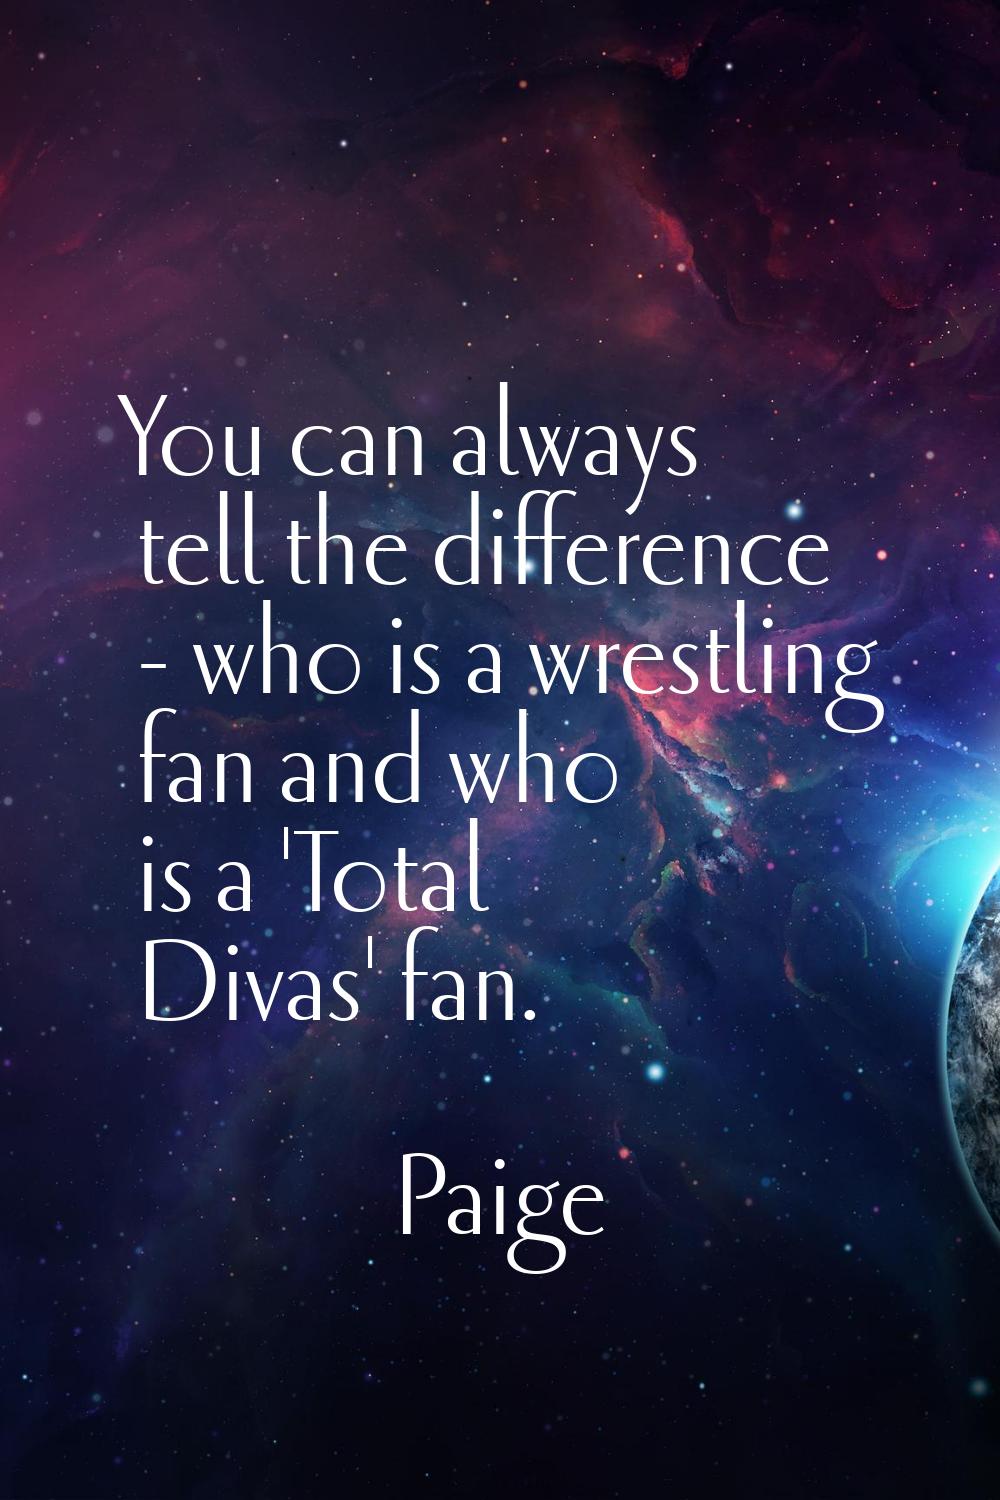 You can always tell the difference - who is a wrestling fan and who is a 'Total Divas' fan.